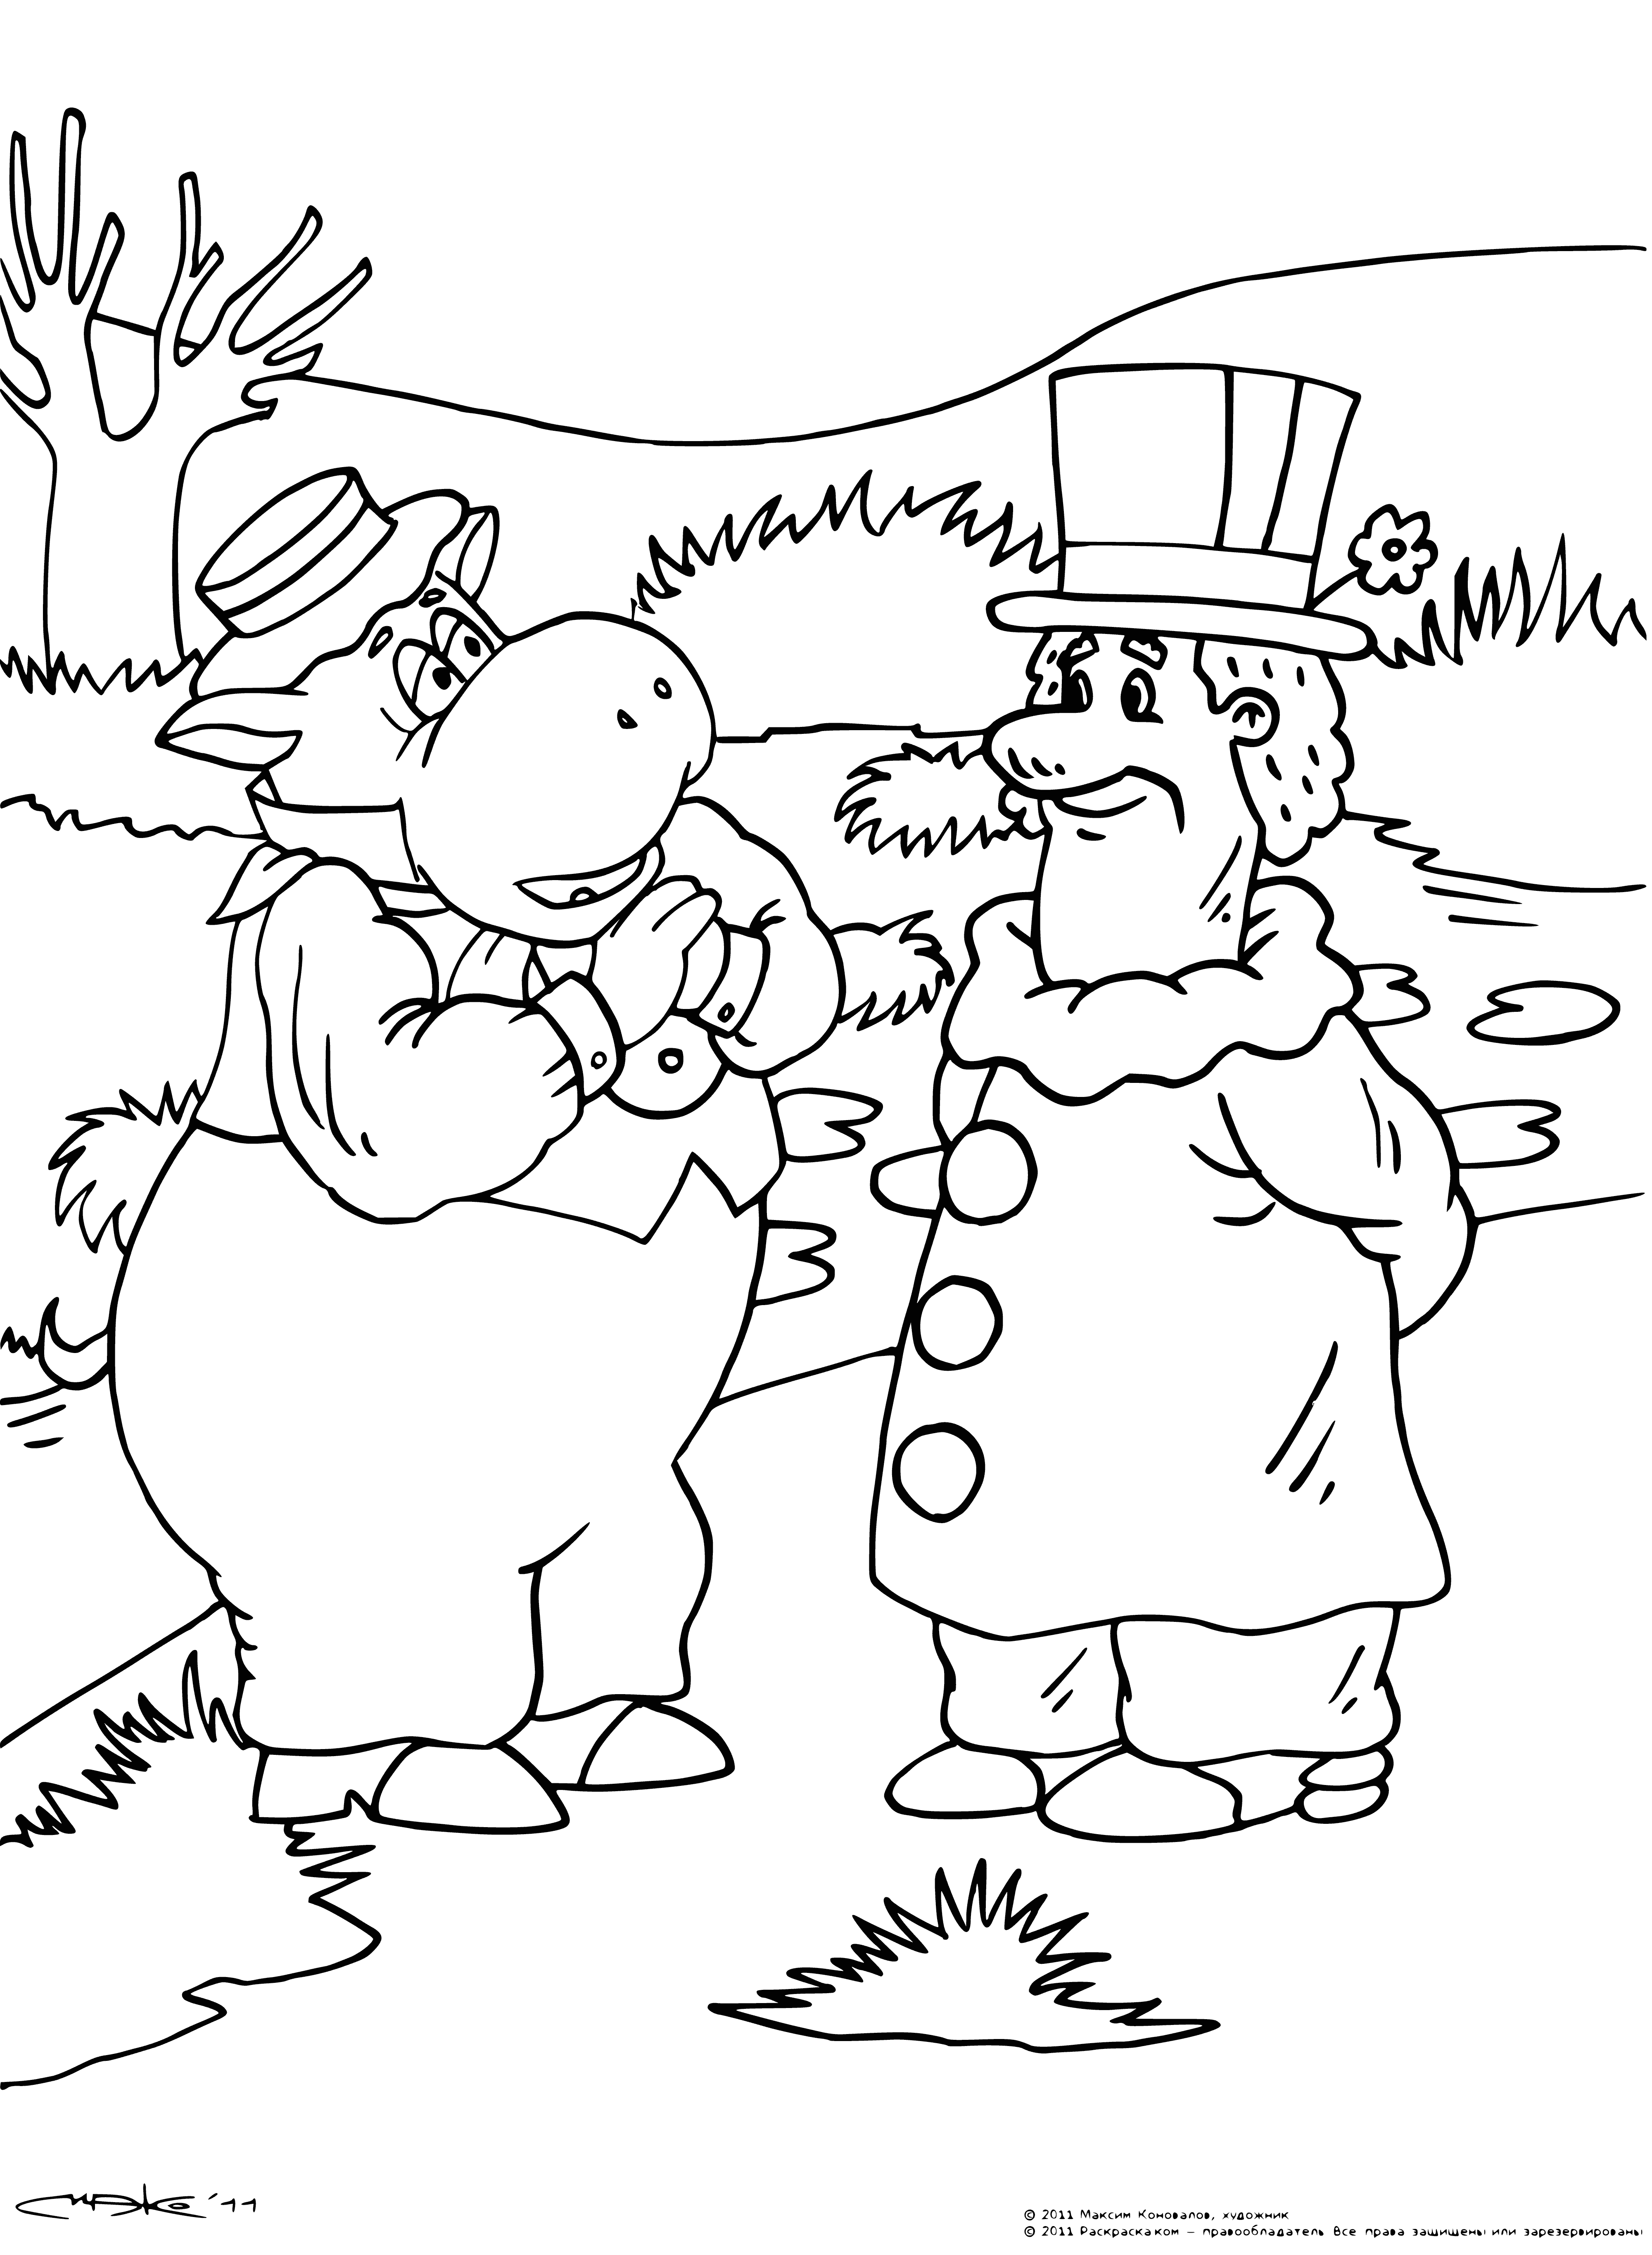 coloring page: Funtik, Hippo and Mocus laugh, play, and explore a watery adventure!